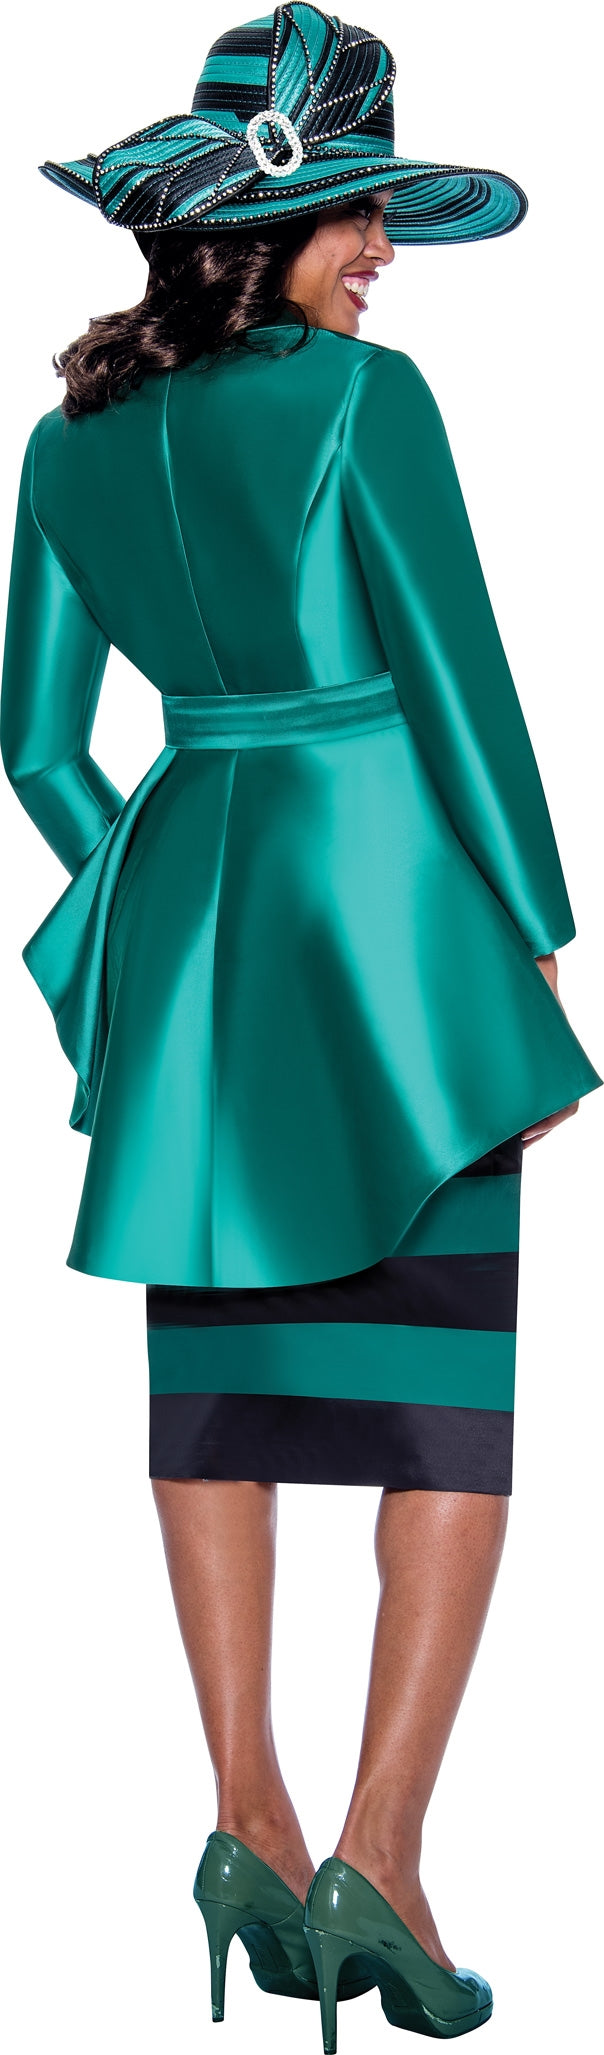 GMI Church Suit 9312-Emerald - Church Suits For Less